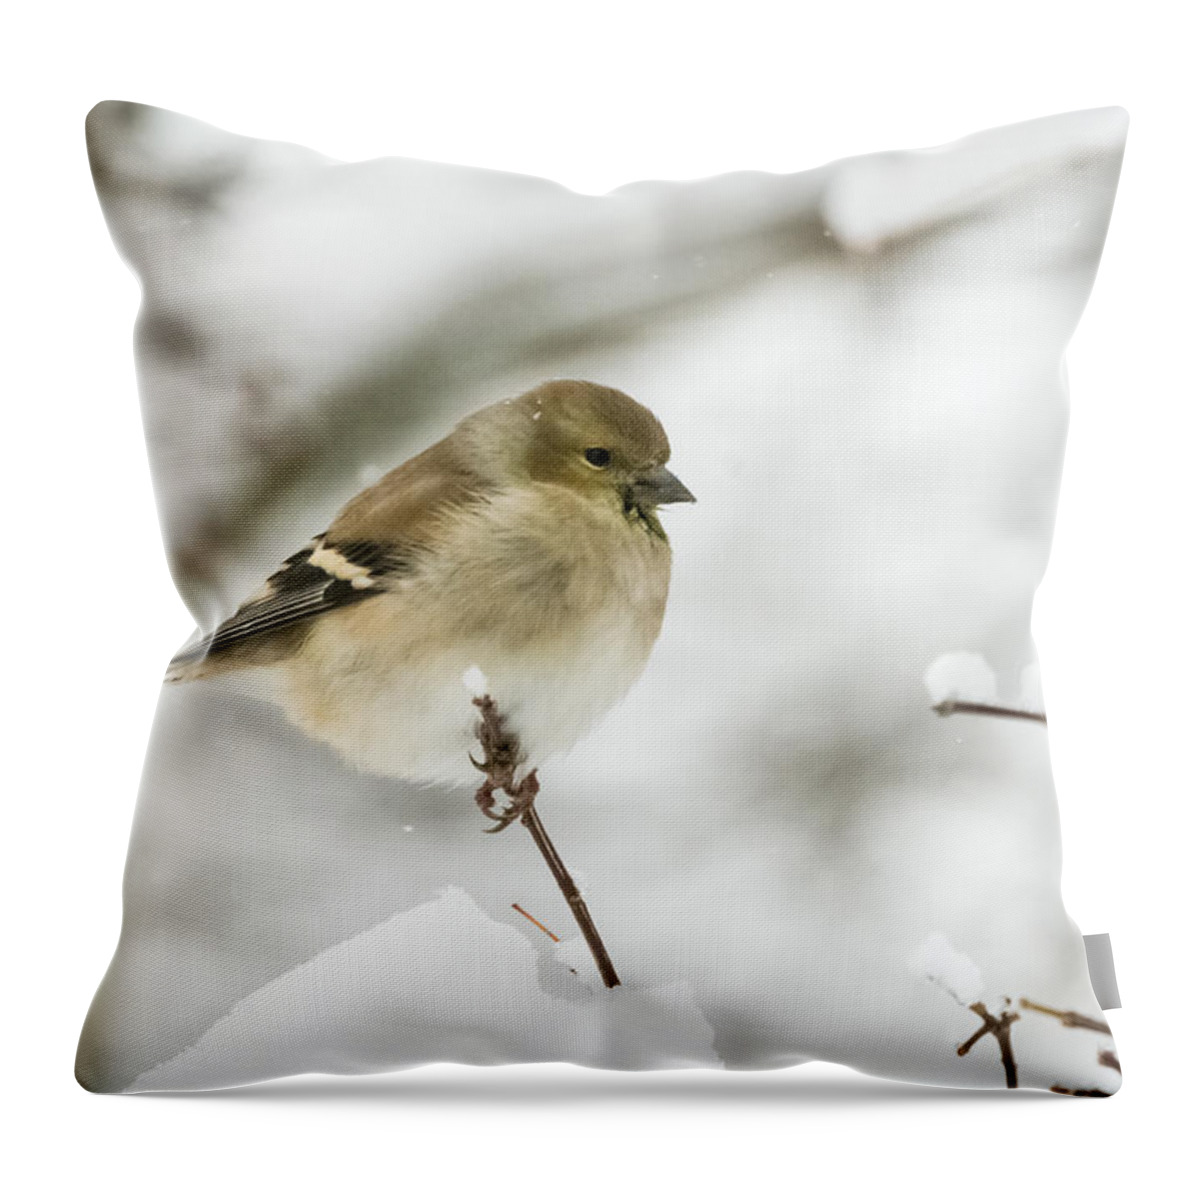 Jan Holden Throw Pillow featuring the photograph American Goldfinch Up Close by Holden The Moment